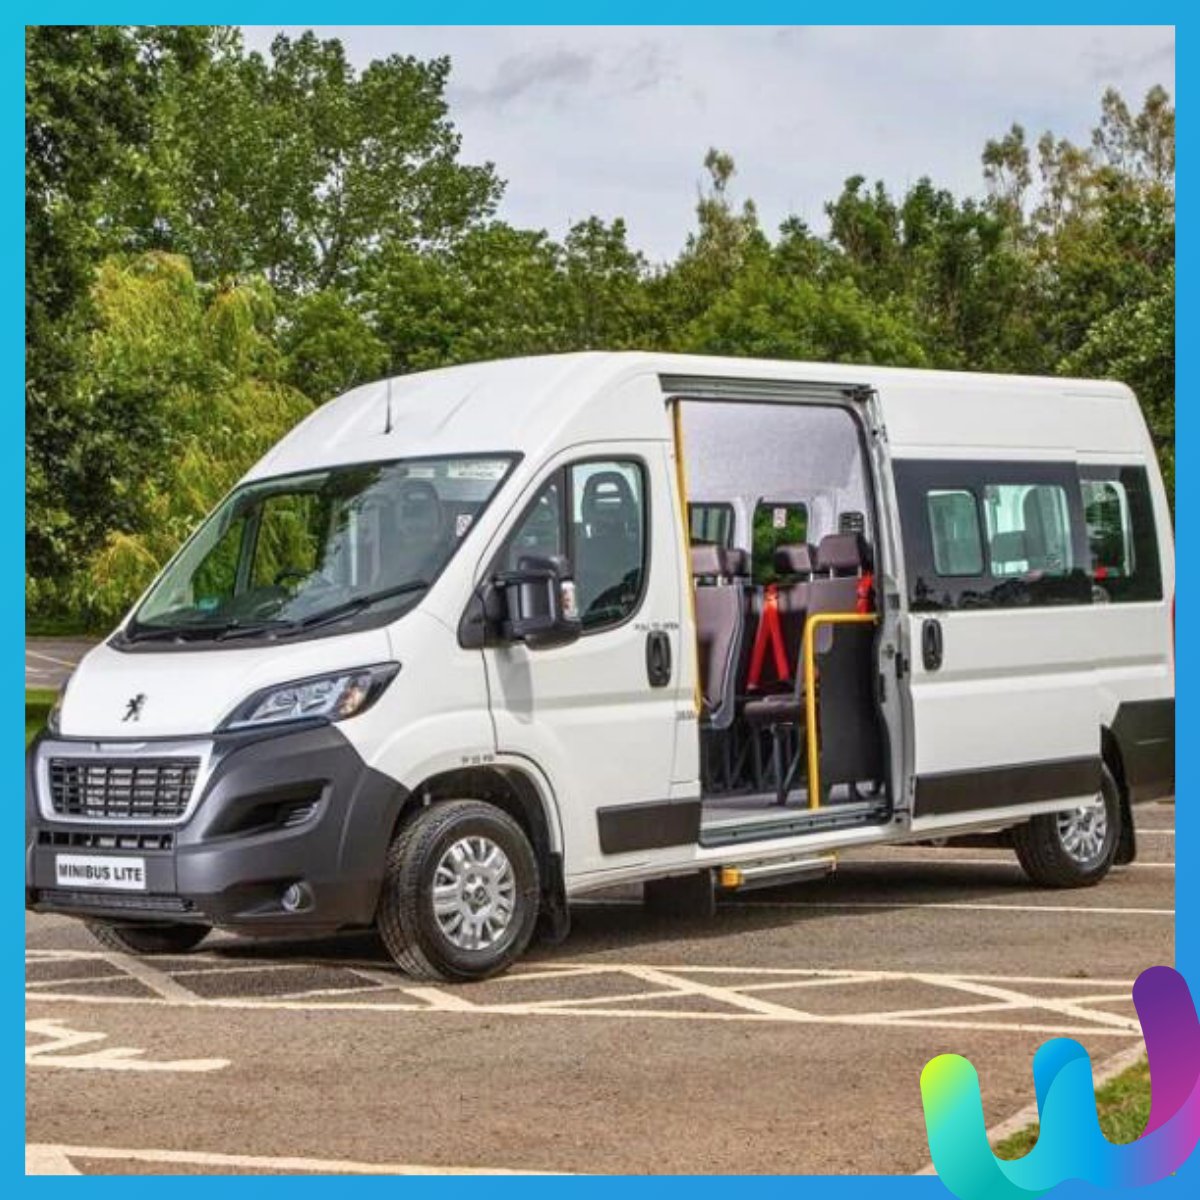 👇We're now taking orders for:

🚐Ford Transit 17 Seat Trend
☑1-5 yr lease
💷From £650+VAT pm
📅Delivery due Sept/Oct 24

🚐Peugeot 17 Seat Minibus Lite
☑Can drive on car licence
📅Delivery due Jun 24
♿Accessible

📞01722 548193
wessexfleet.co.uk/minibus-leasin…
#minibus #EducationUK